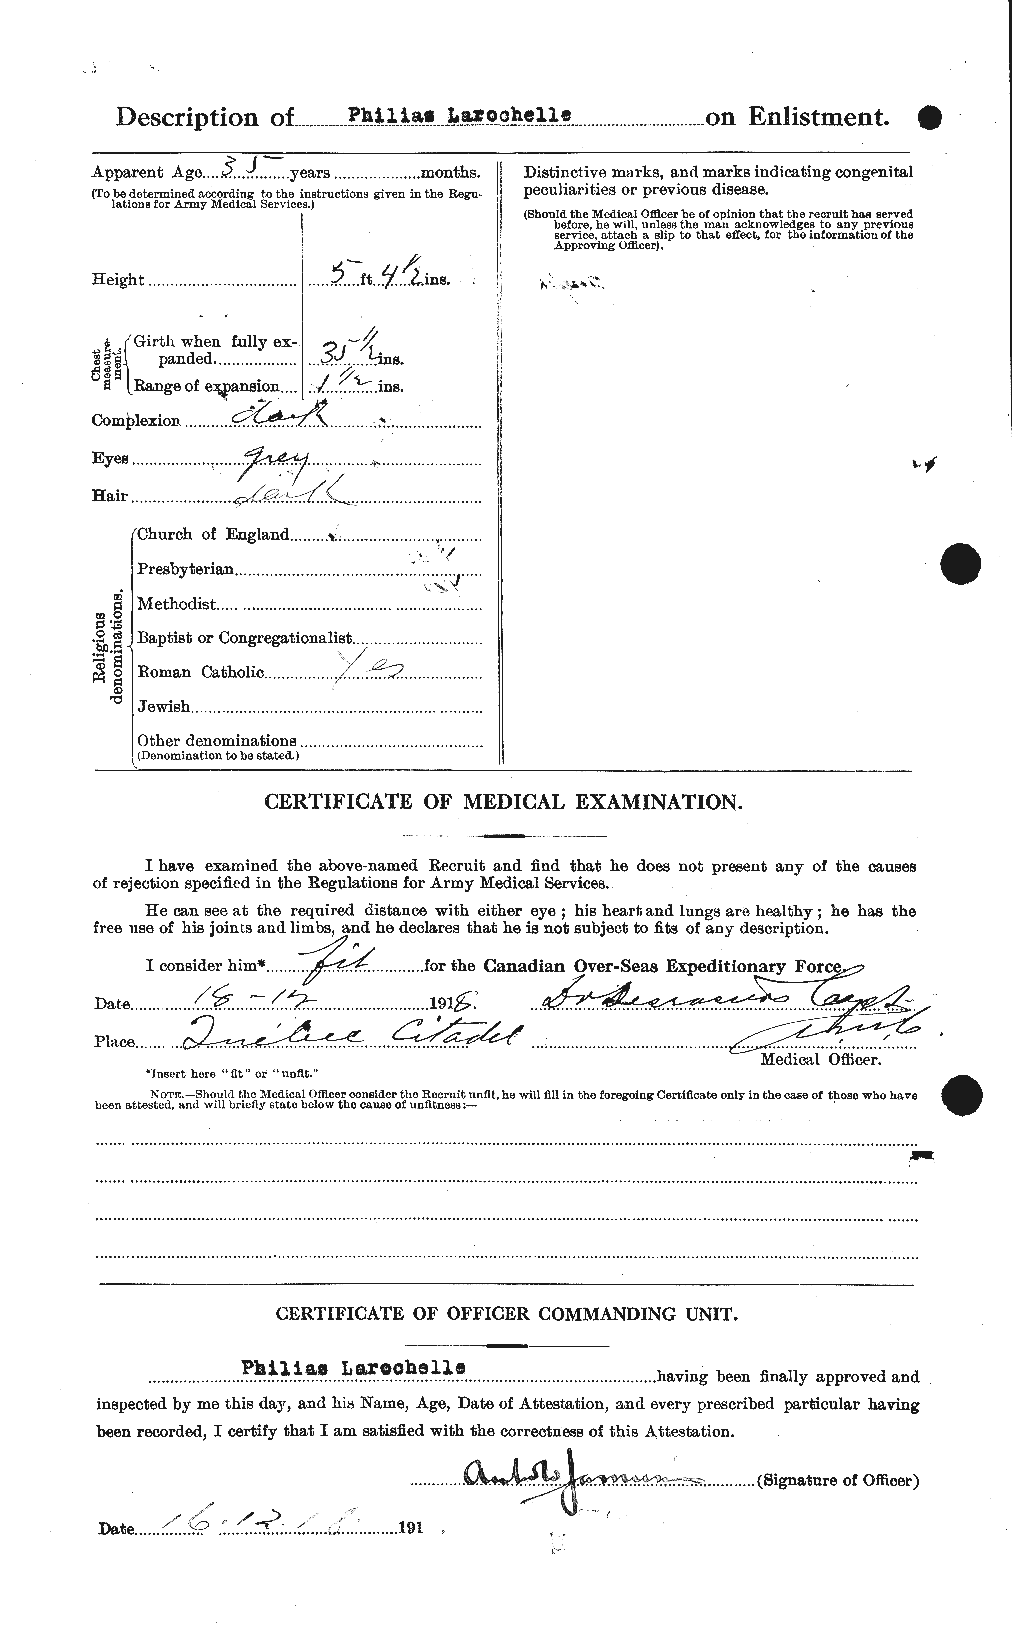 Personnel Records of the First World War - CEF 450789b